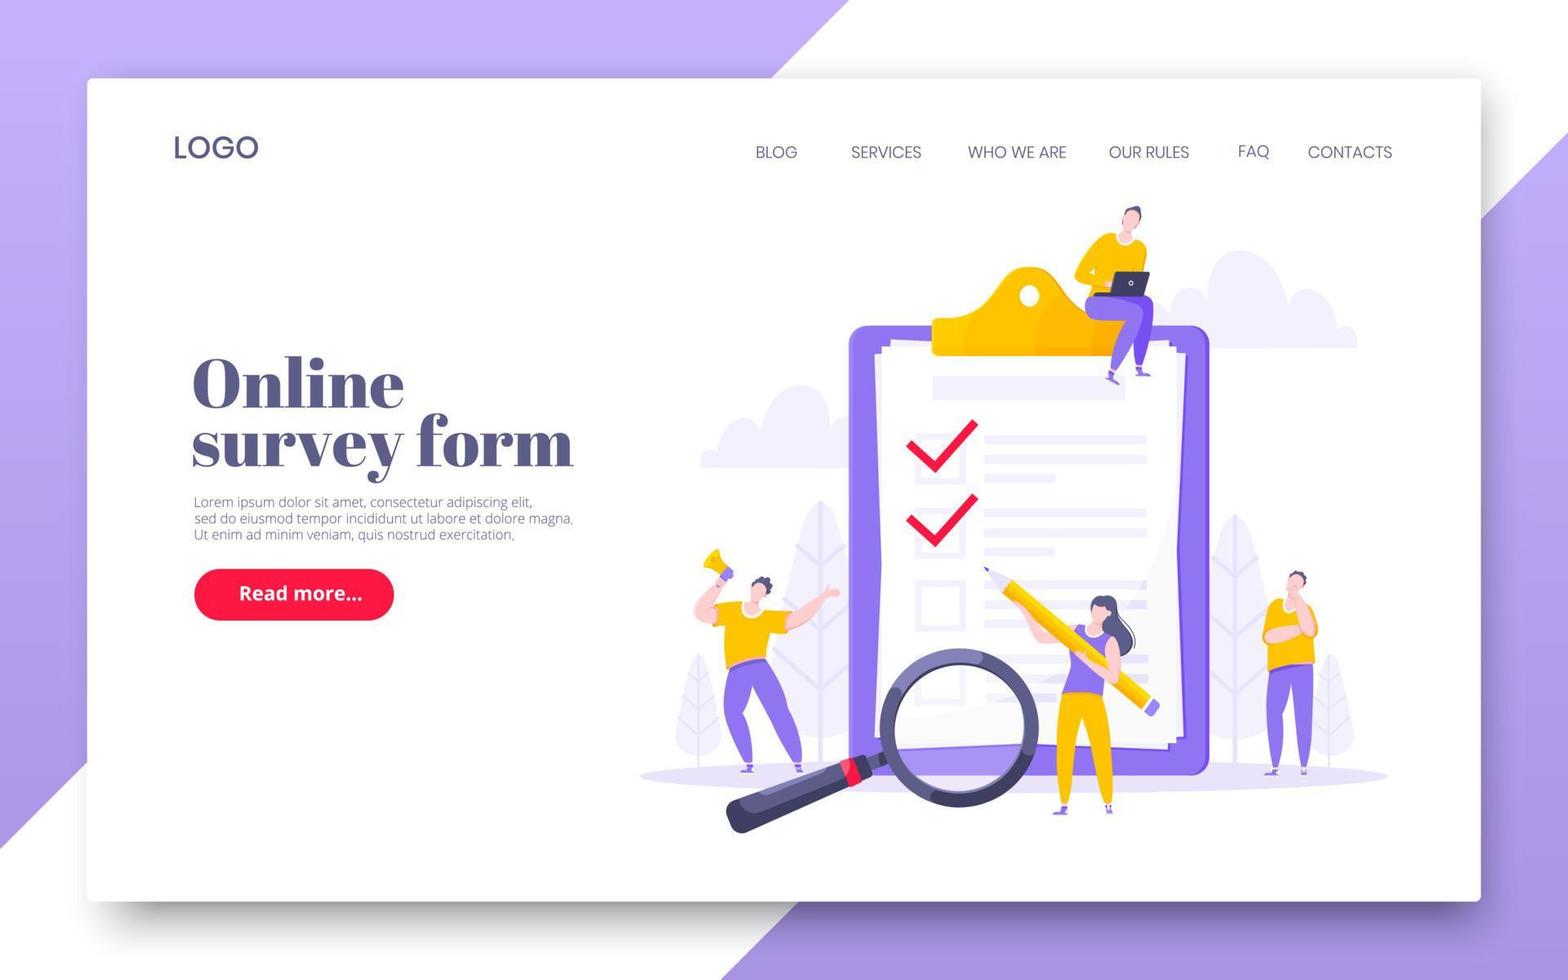 Online survey form business concept with tiny people with megaphone, pencil nearby giant clipboard complete. vector